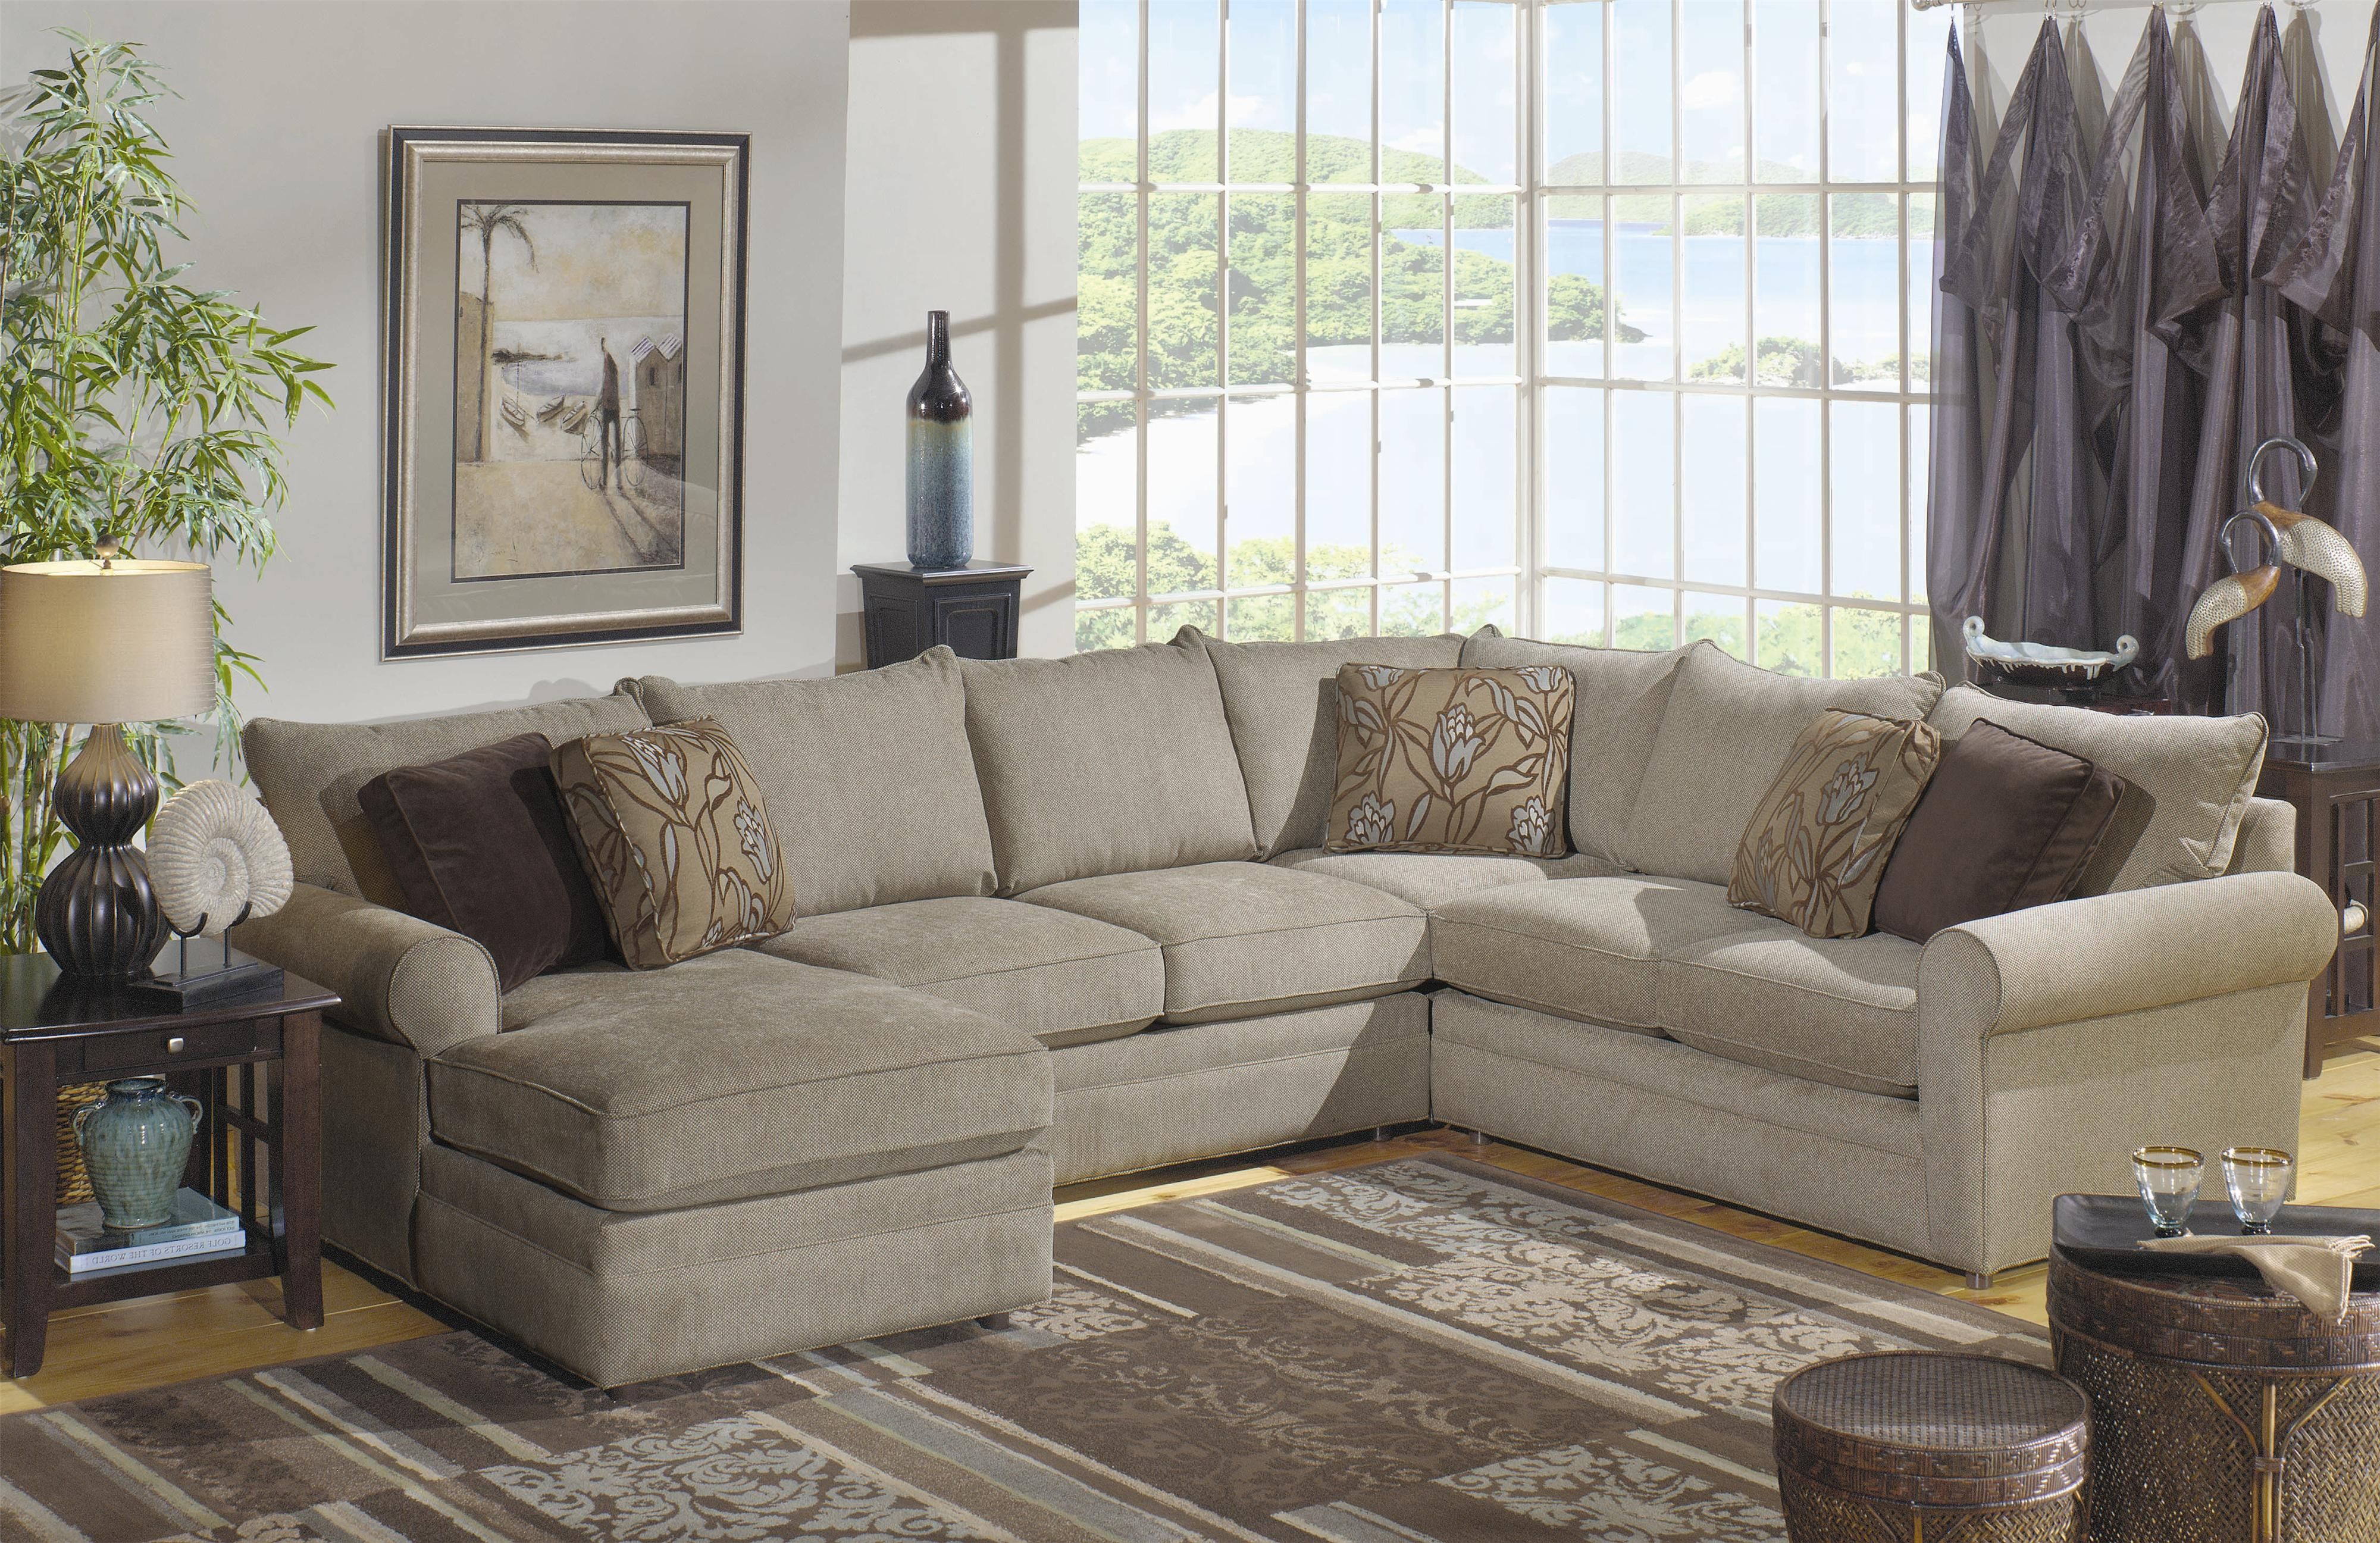 Craftmaster Sectional Sofa Thesofa Pertaining To Craftsman Sectional Sofa (View 7 of 12)